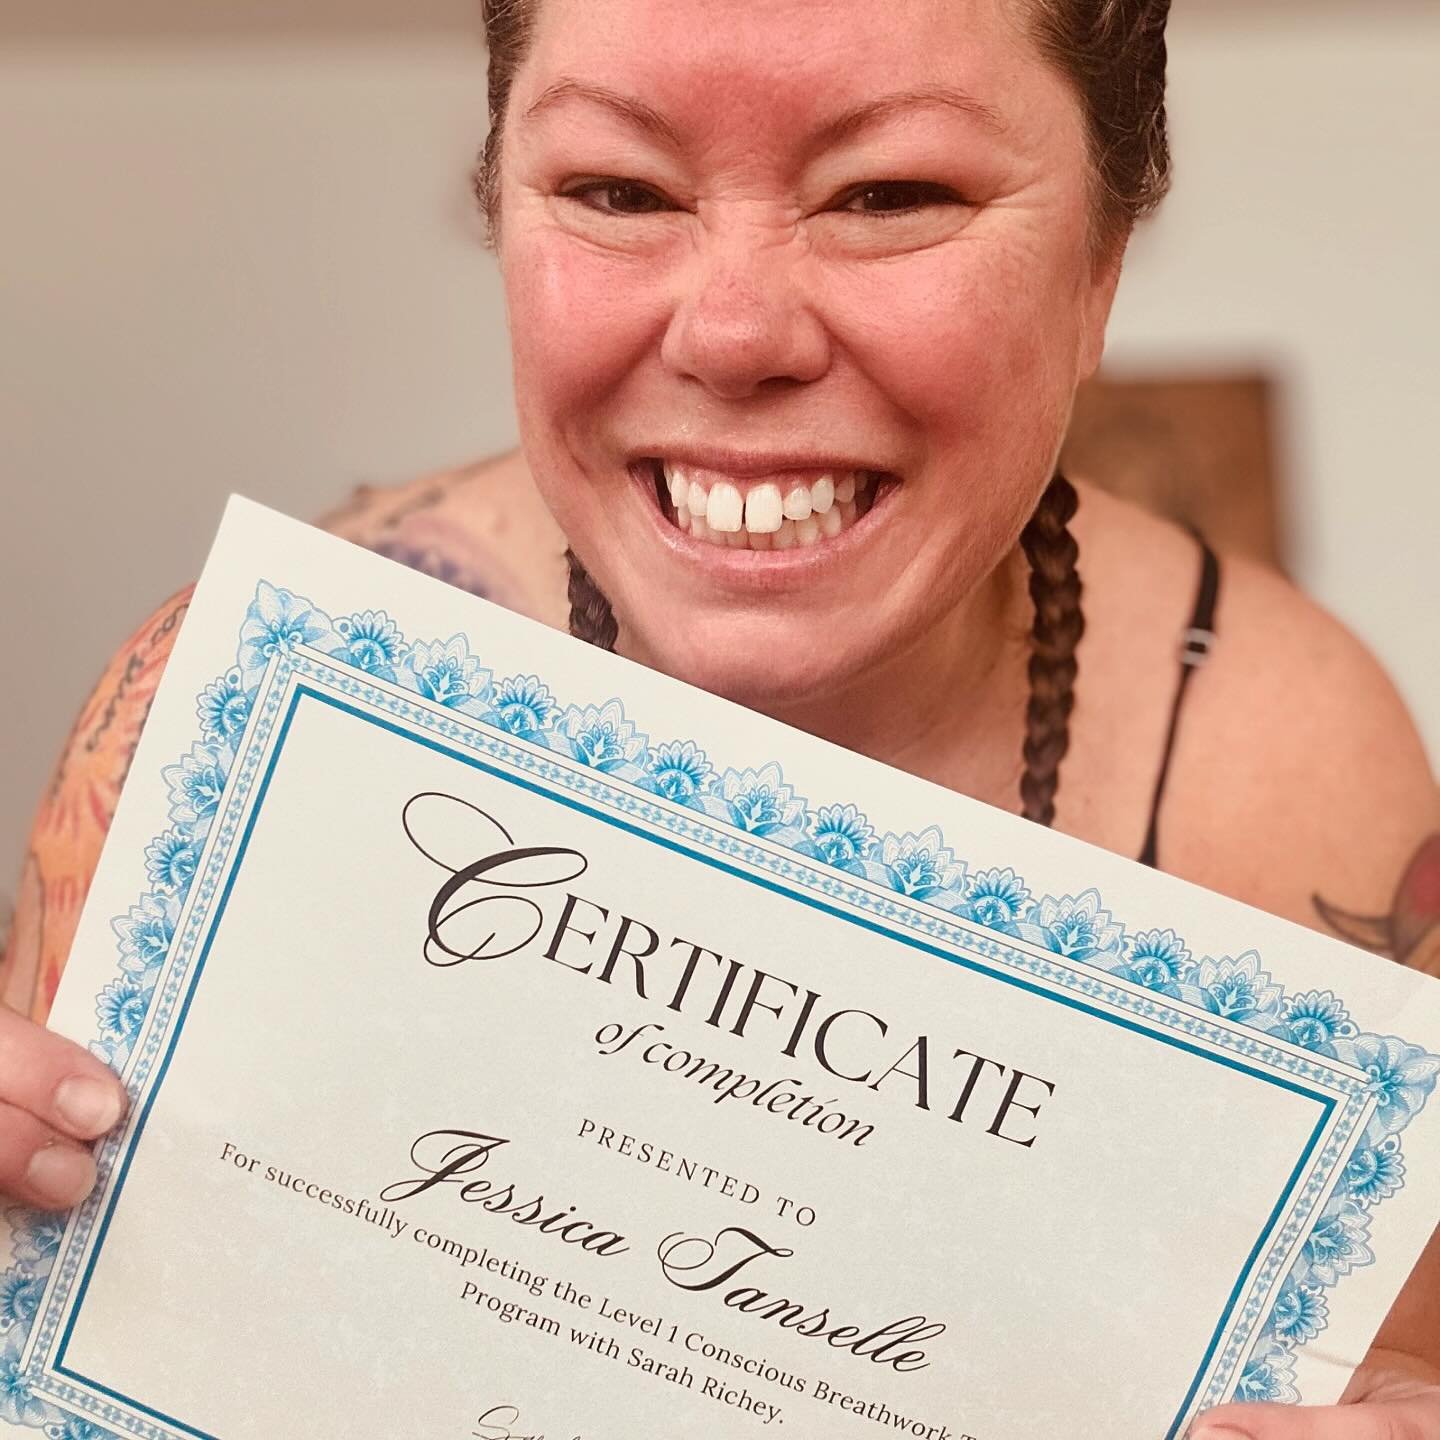 I did a thang! I am now a certified Conscious Breathwork Facilitator. I am excited to share the medicine of breath with you!

Conscious Breathwork is a gateway to altered states of consciousness where profound healing and transformation can occur.

C